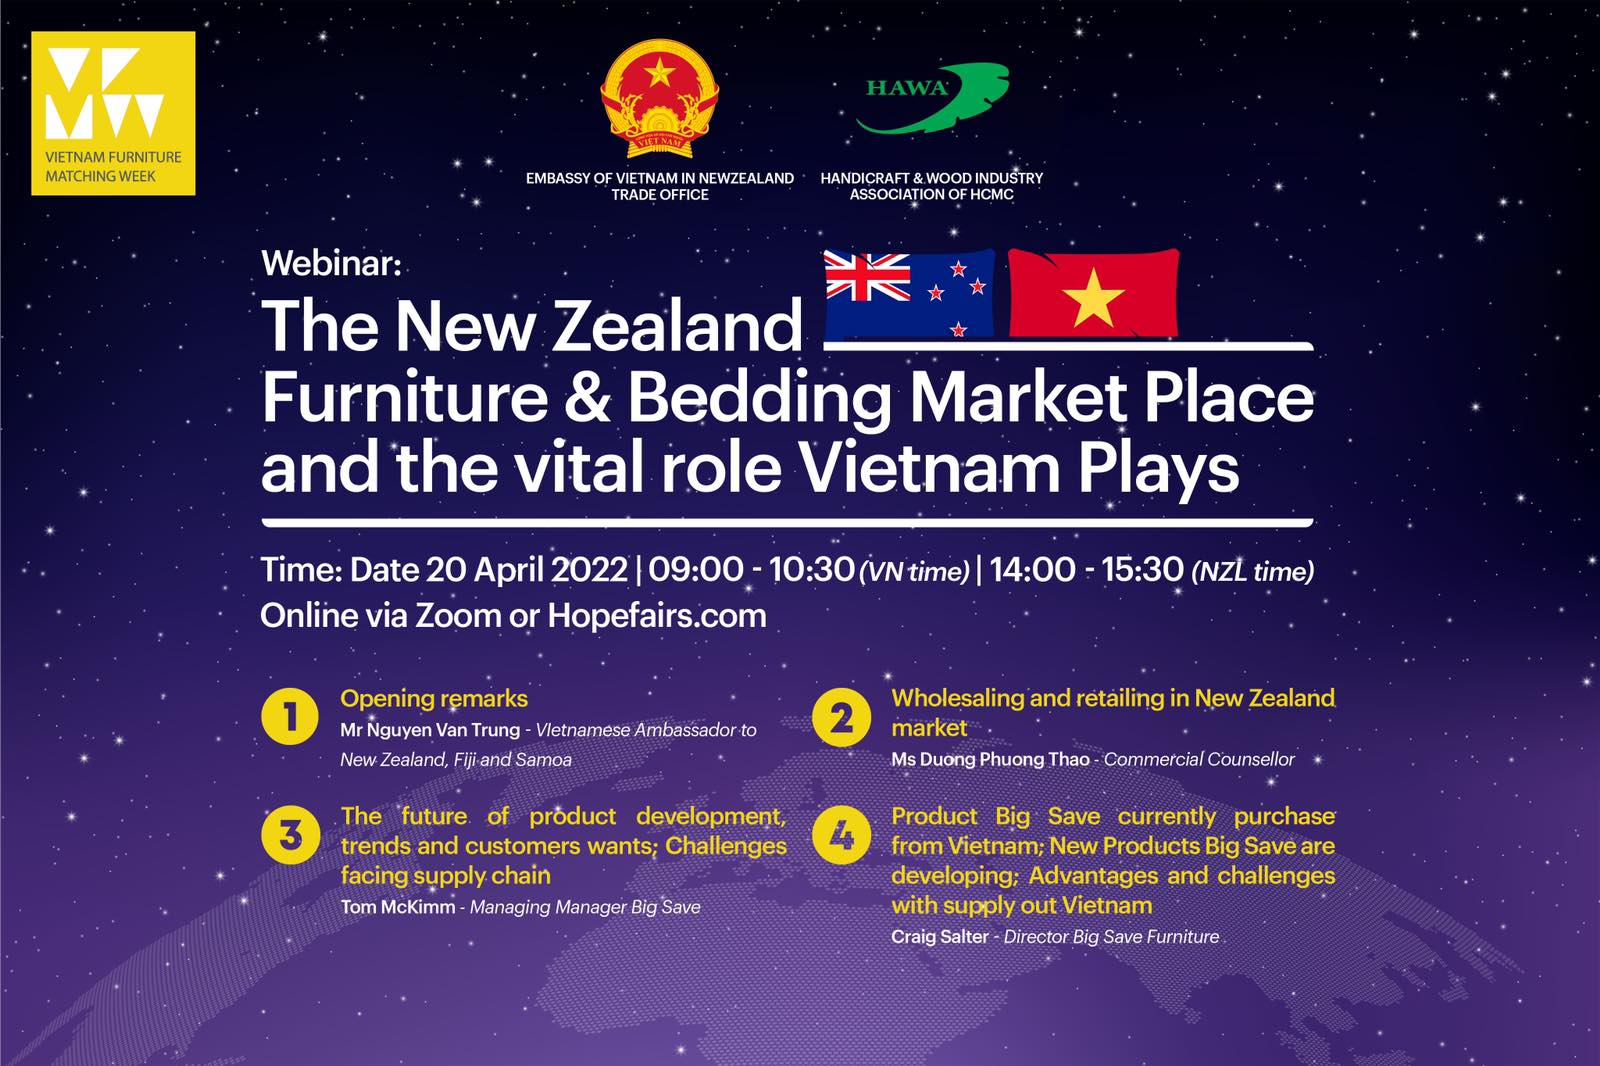 Webinar: The New Zealand furniture & bedding market place, and vital role Vietnam plays